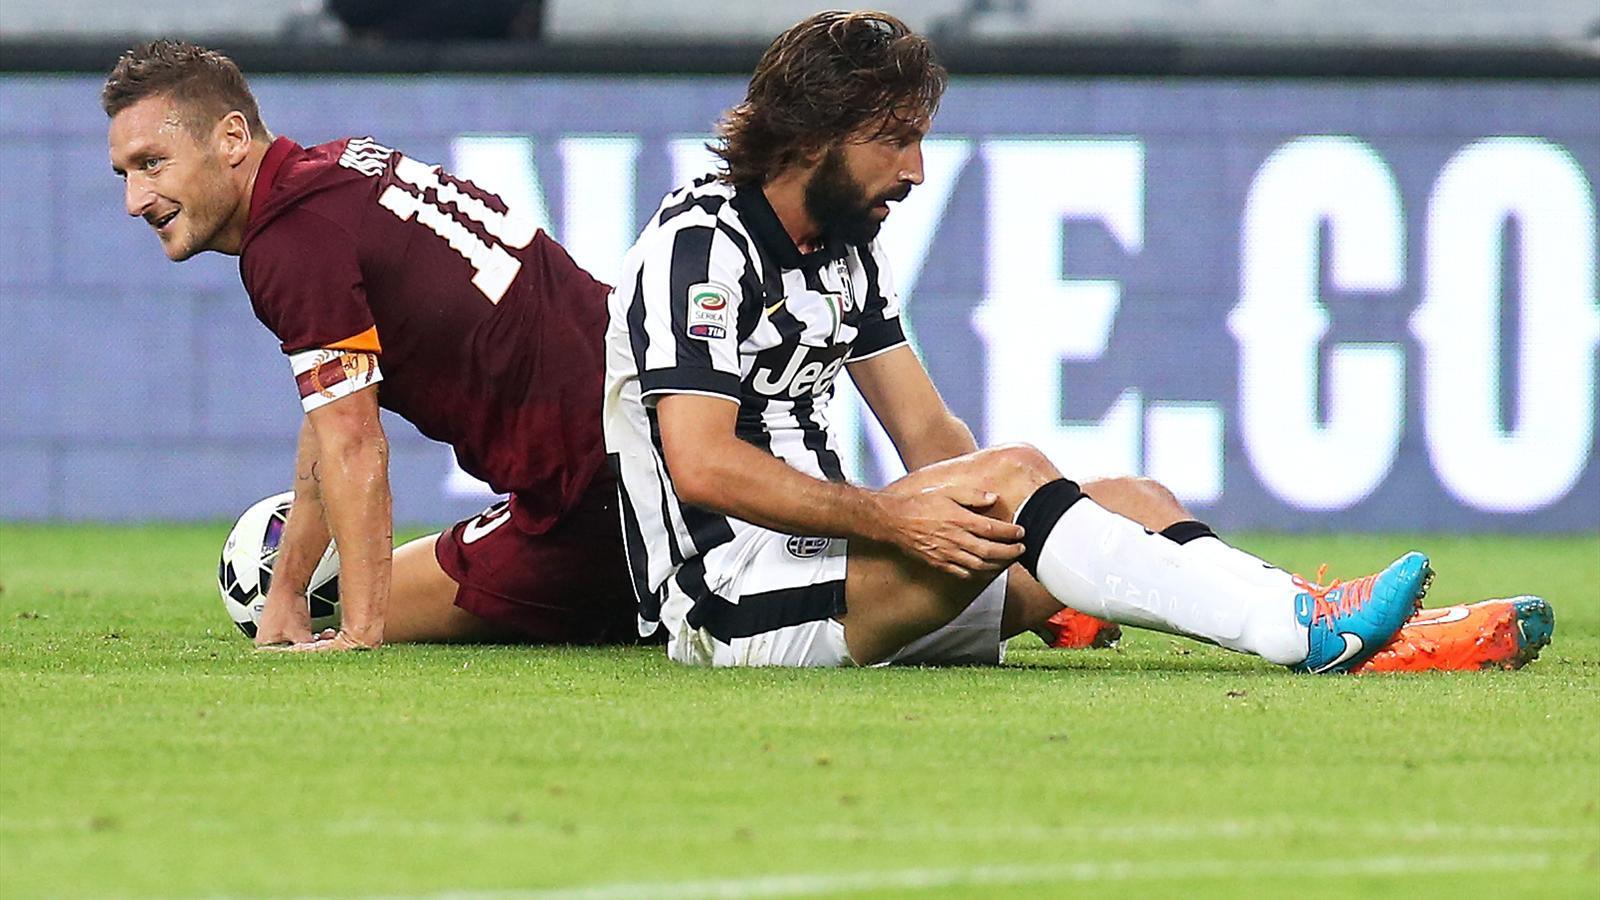 Juventus V Roma: The Real Match Of The Weekend A 2014 2015